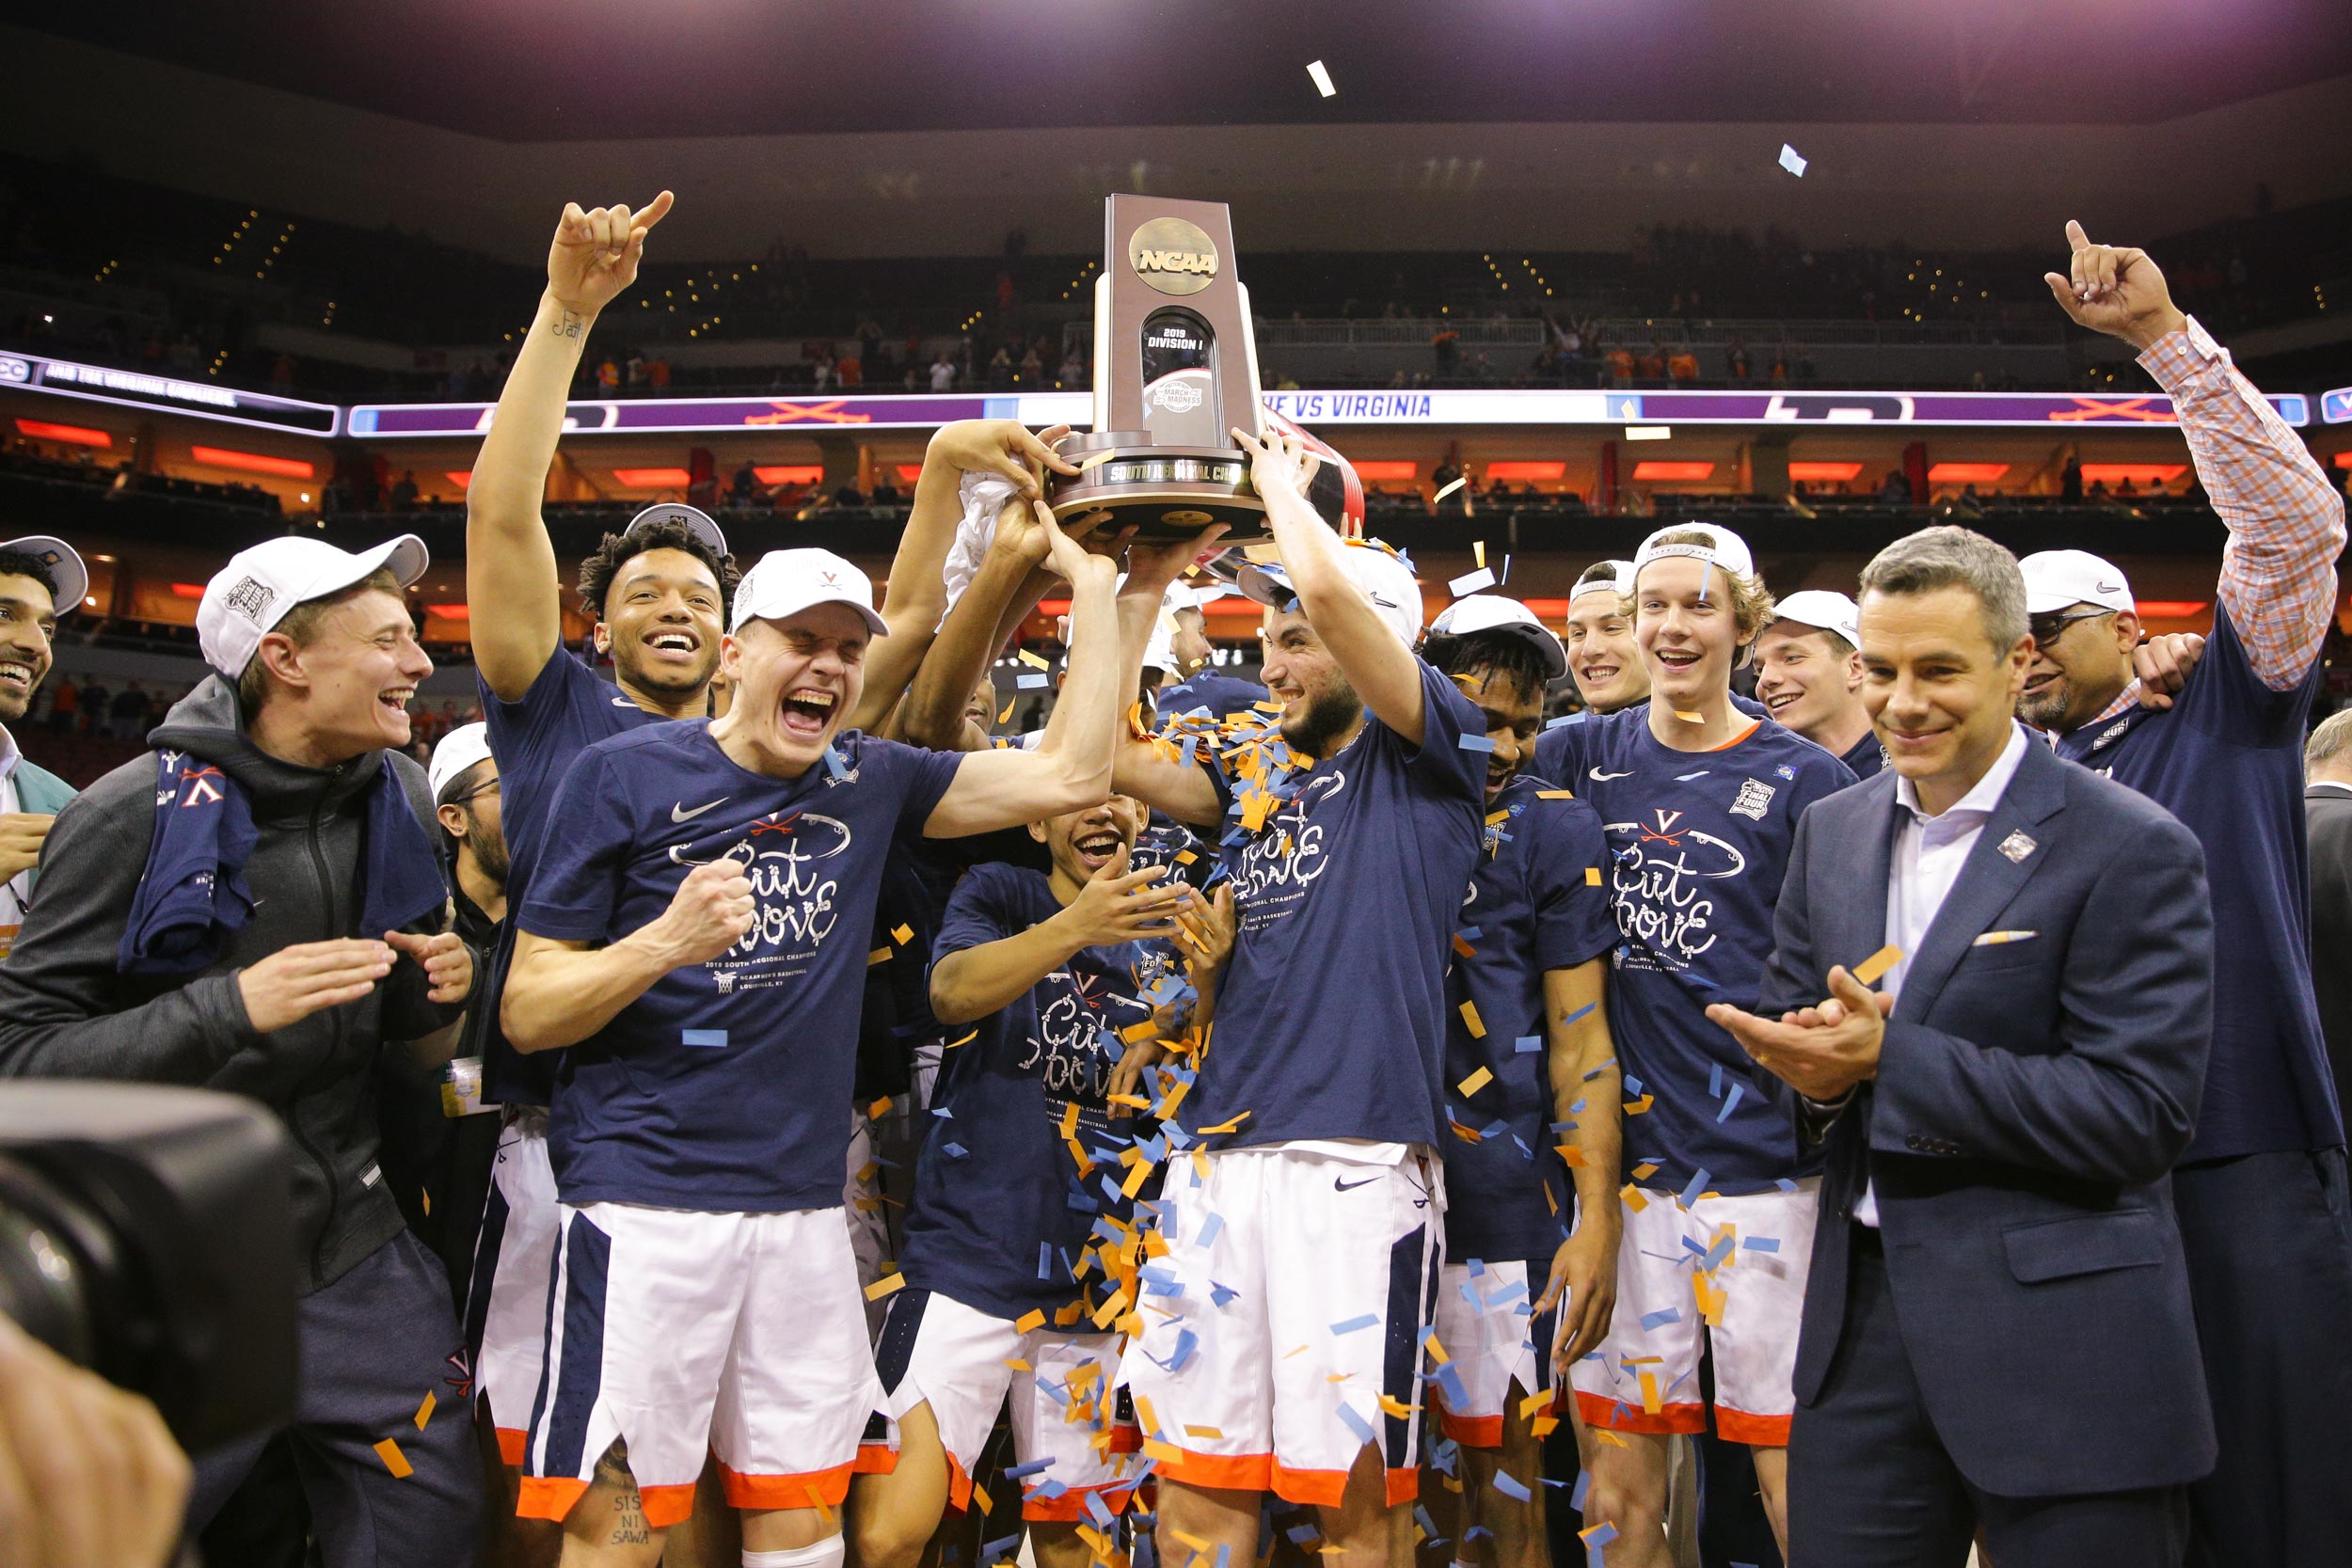 UVA basketball team holding up the NCAA championship trophy